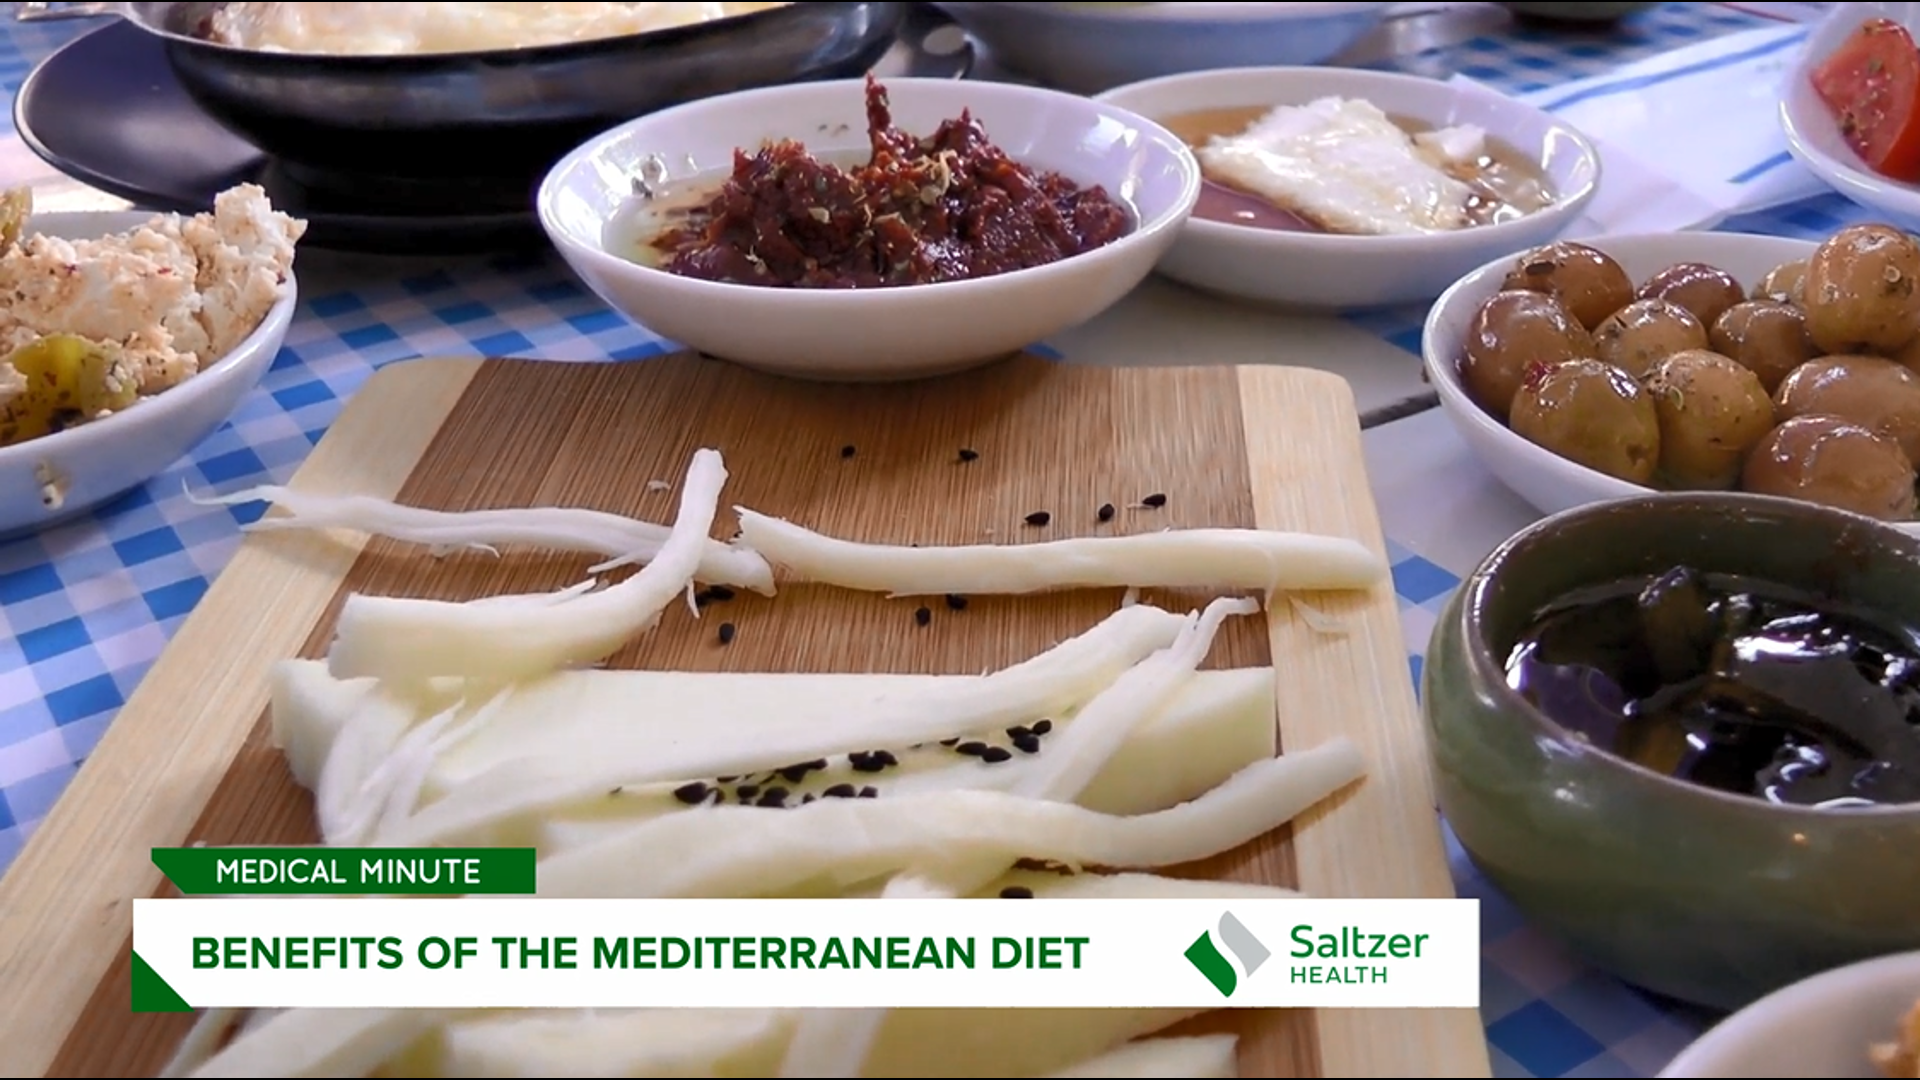 Pohley Richey, Registered Dietitian & Personal Trainer with Saltzer Health explains the benefits of the Mediterranean Diet and how it can help your heart health.